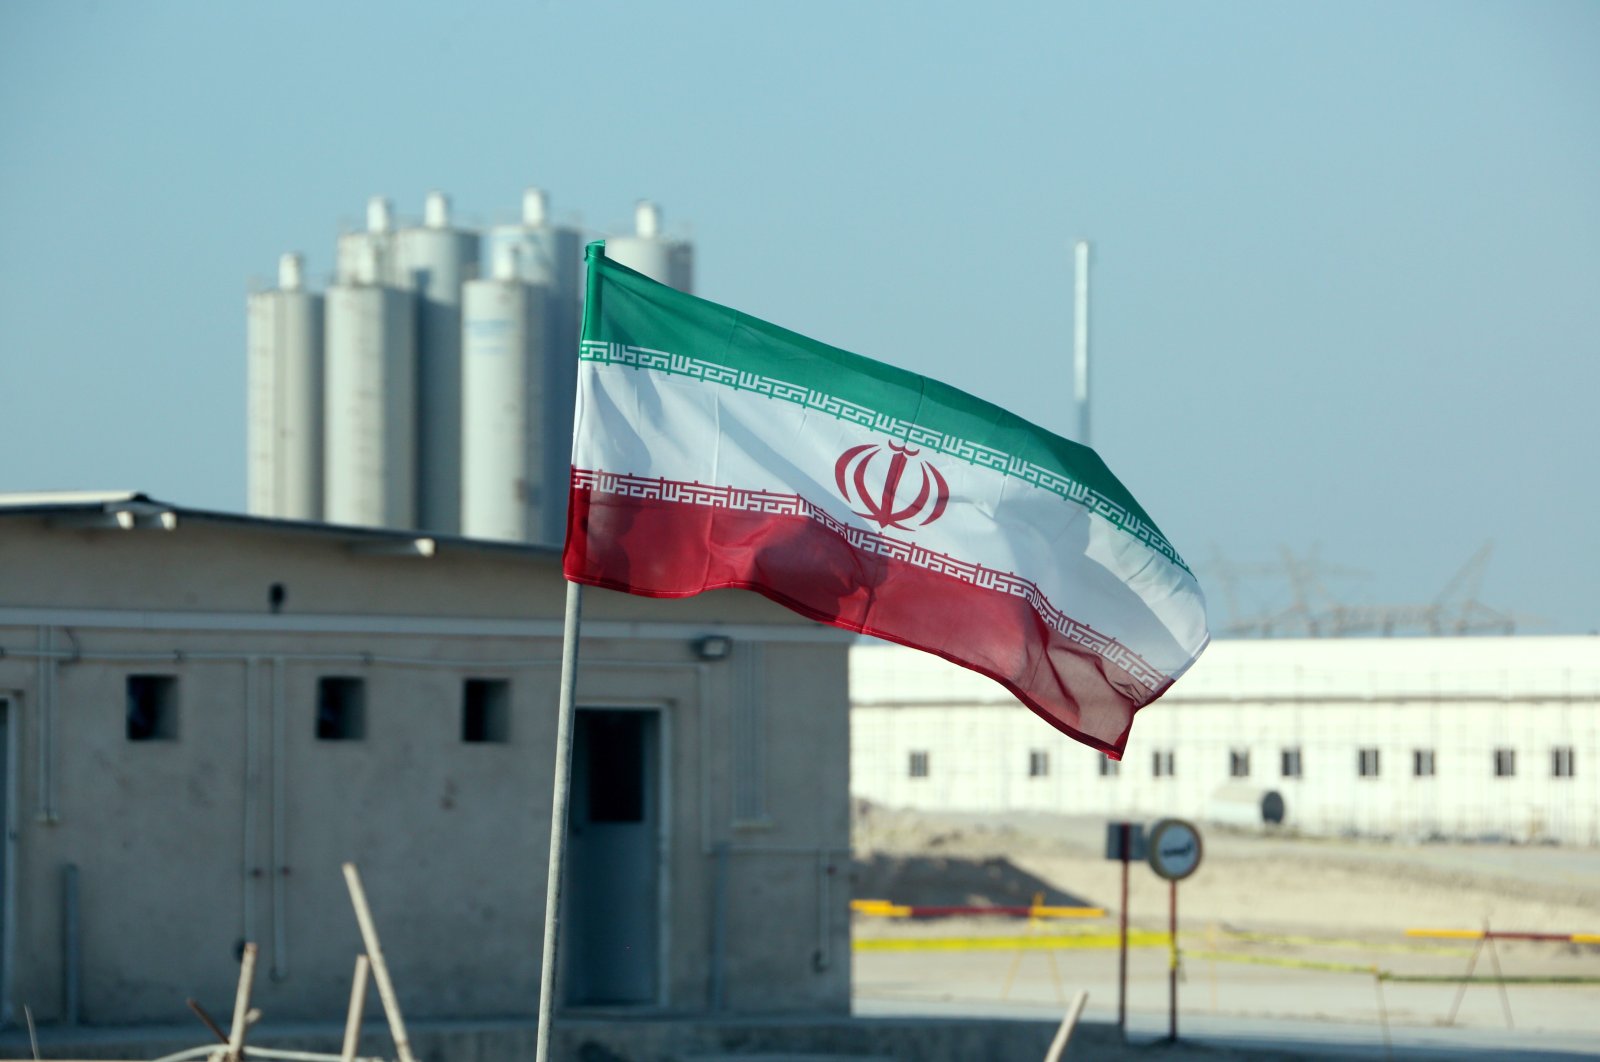 An Iranian flag at Iran's Bushehr nuclear power plant during an official ceremony to kick-start work on a second reactor at the facility, Nov. 10, 2019. (AFP Photo)